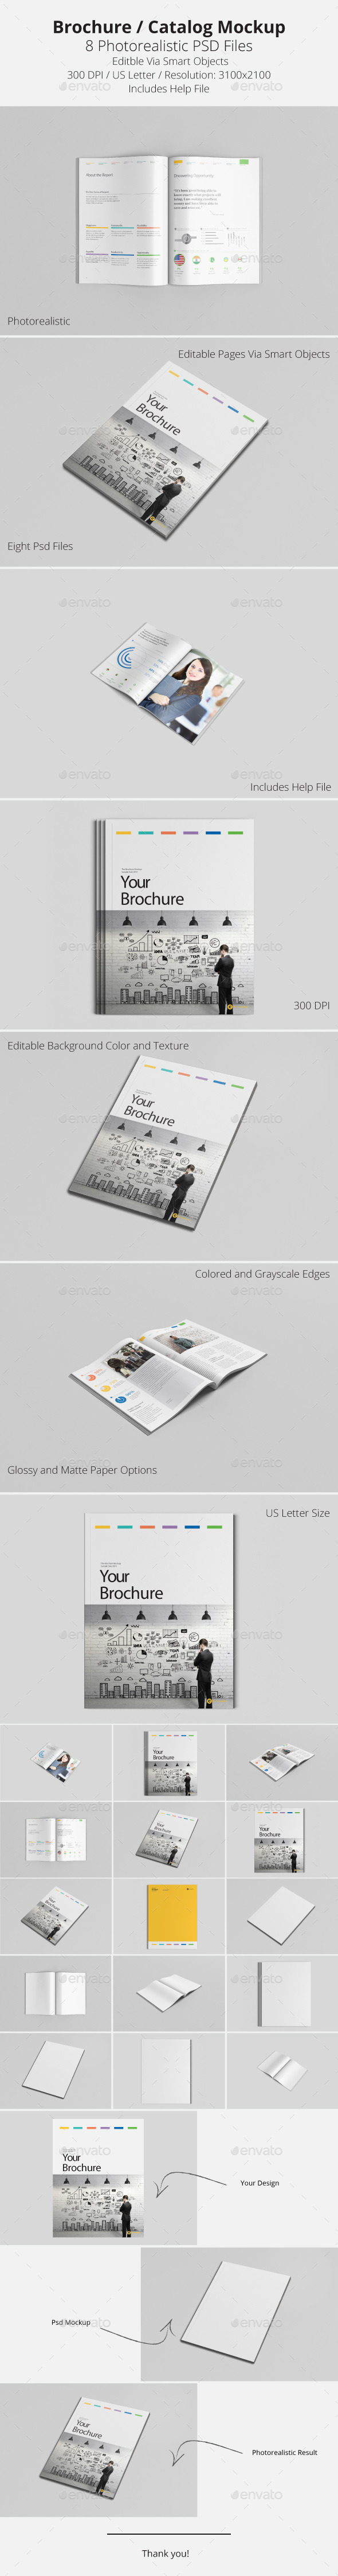 Download Report Mockup Graphics Designs Template From Graphicriver